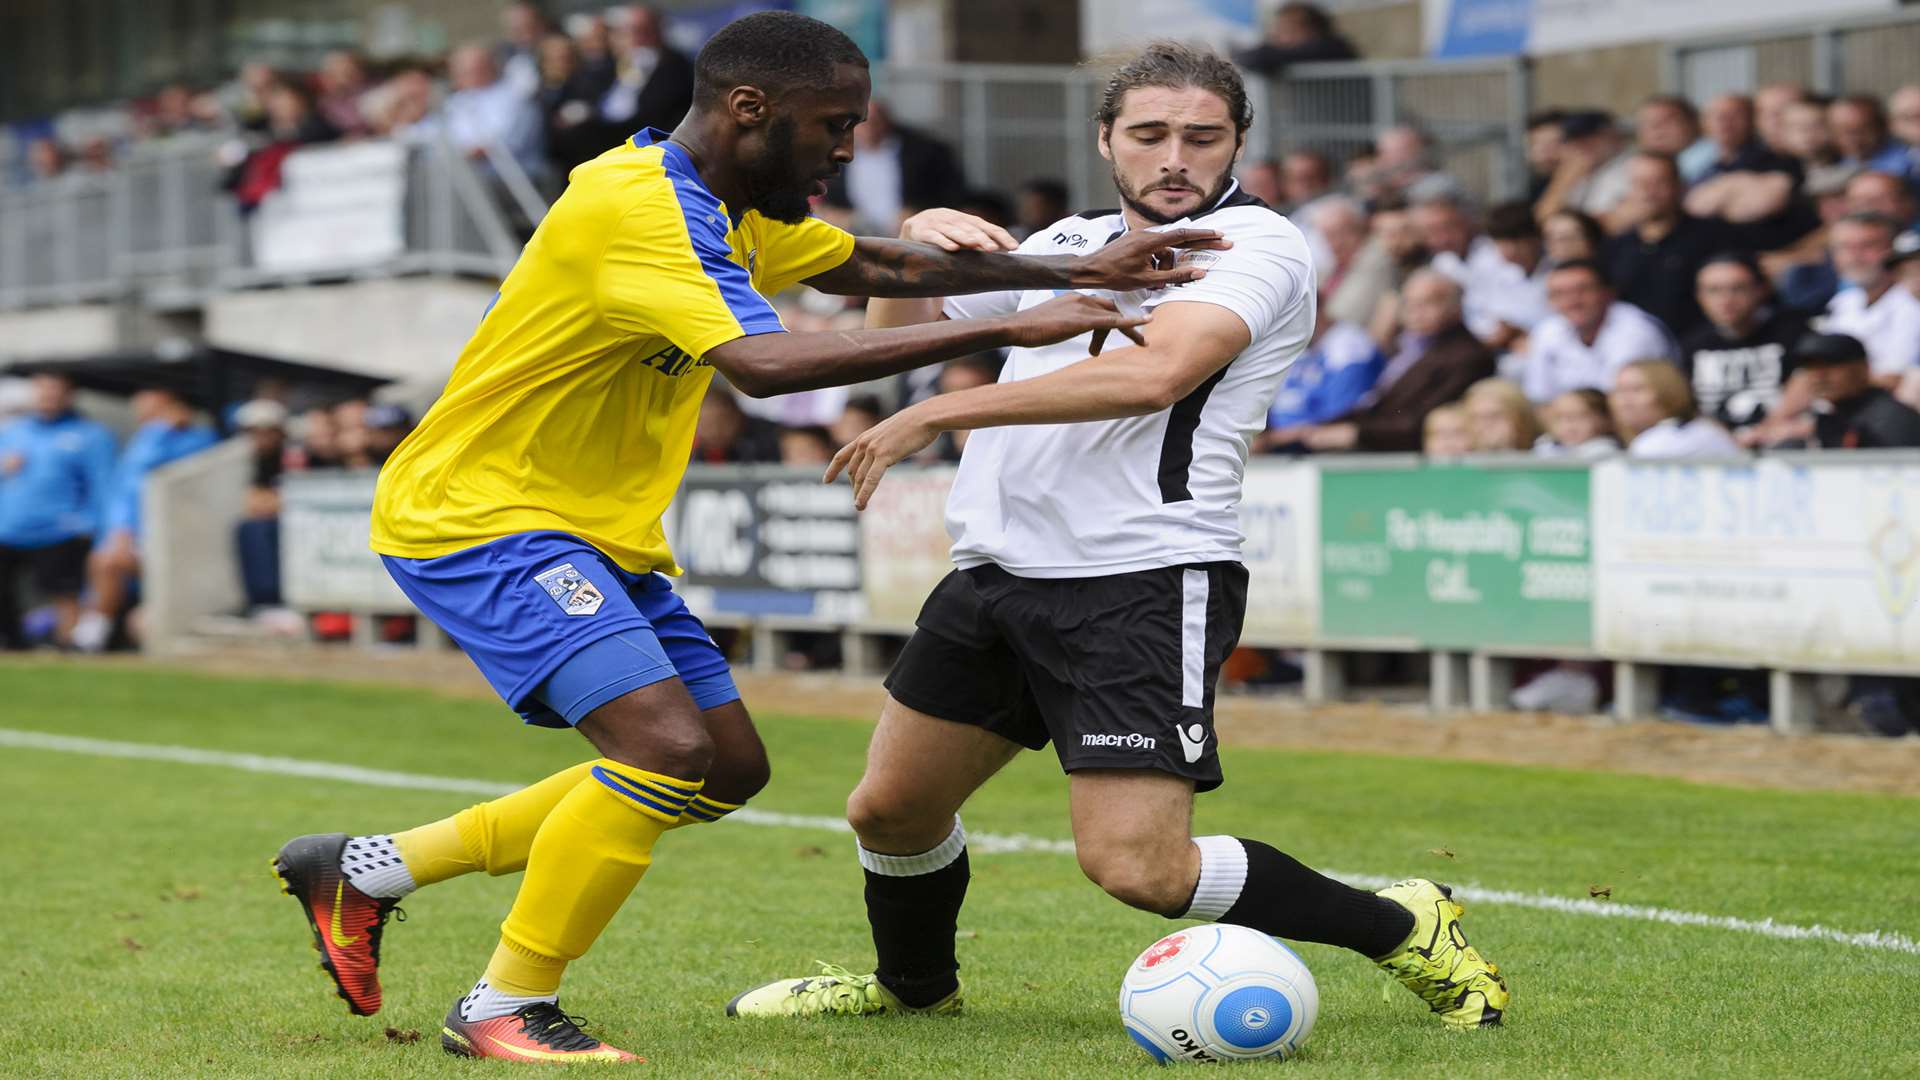 Dartford's Alex Brown is held back by Maidenhead. Picture; Andy Payton